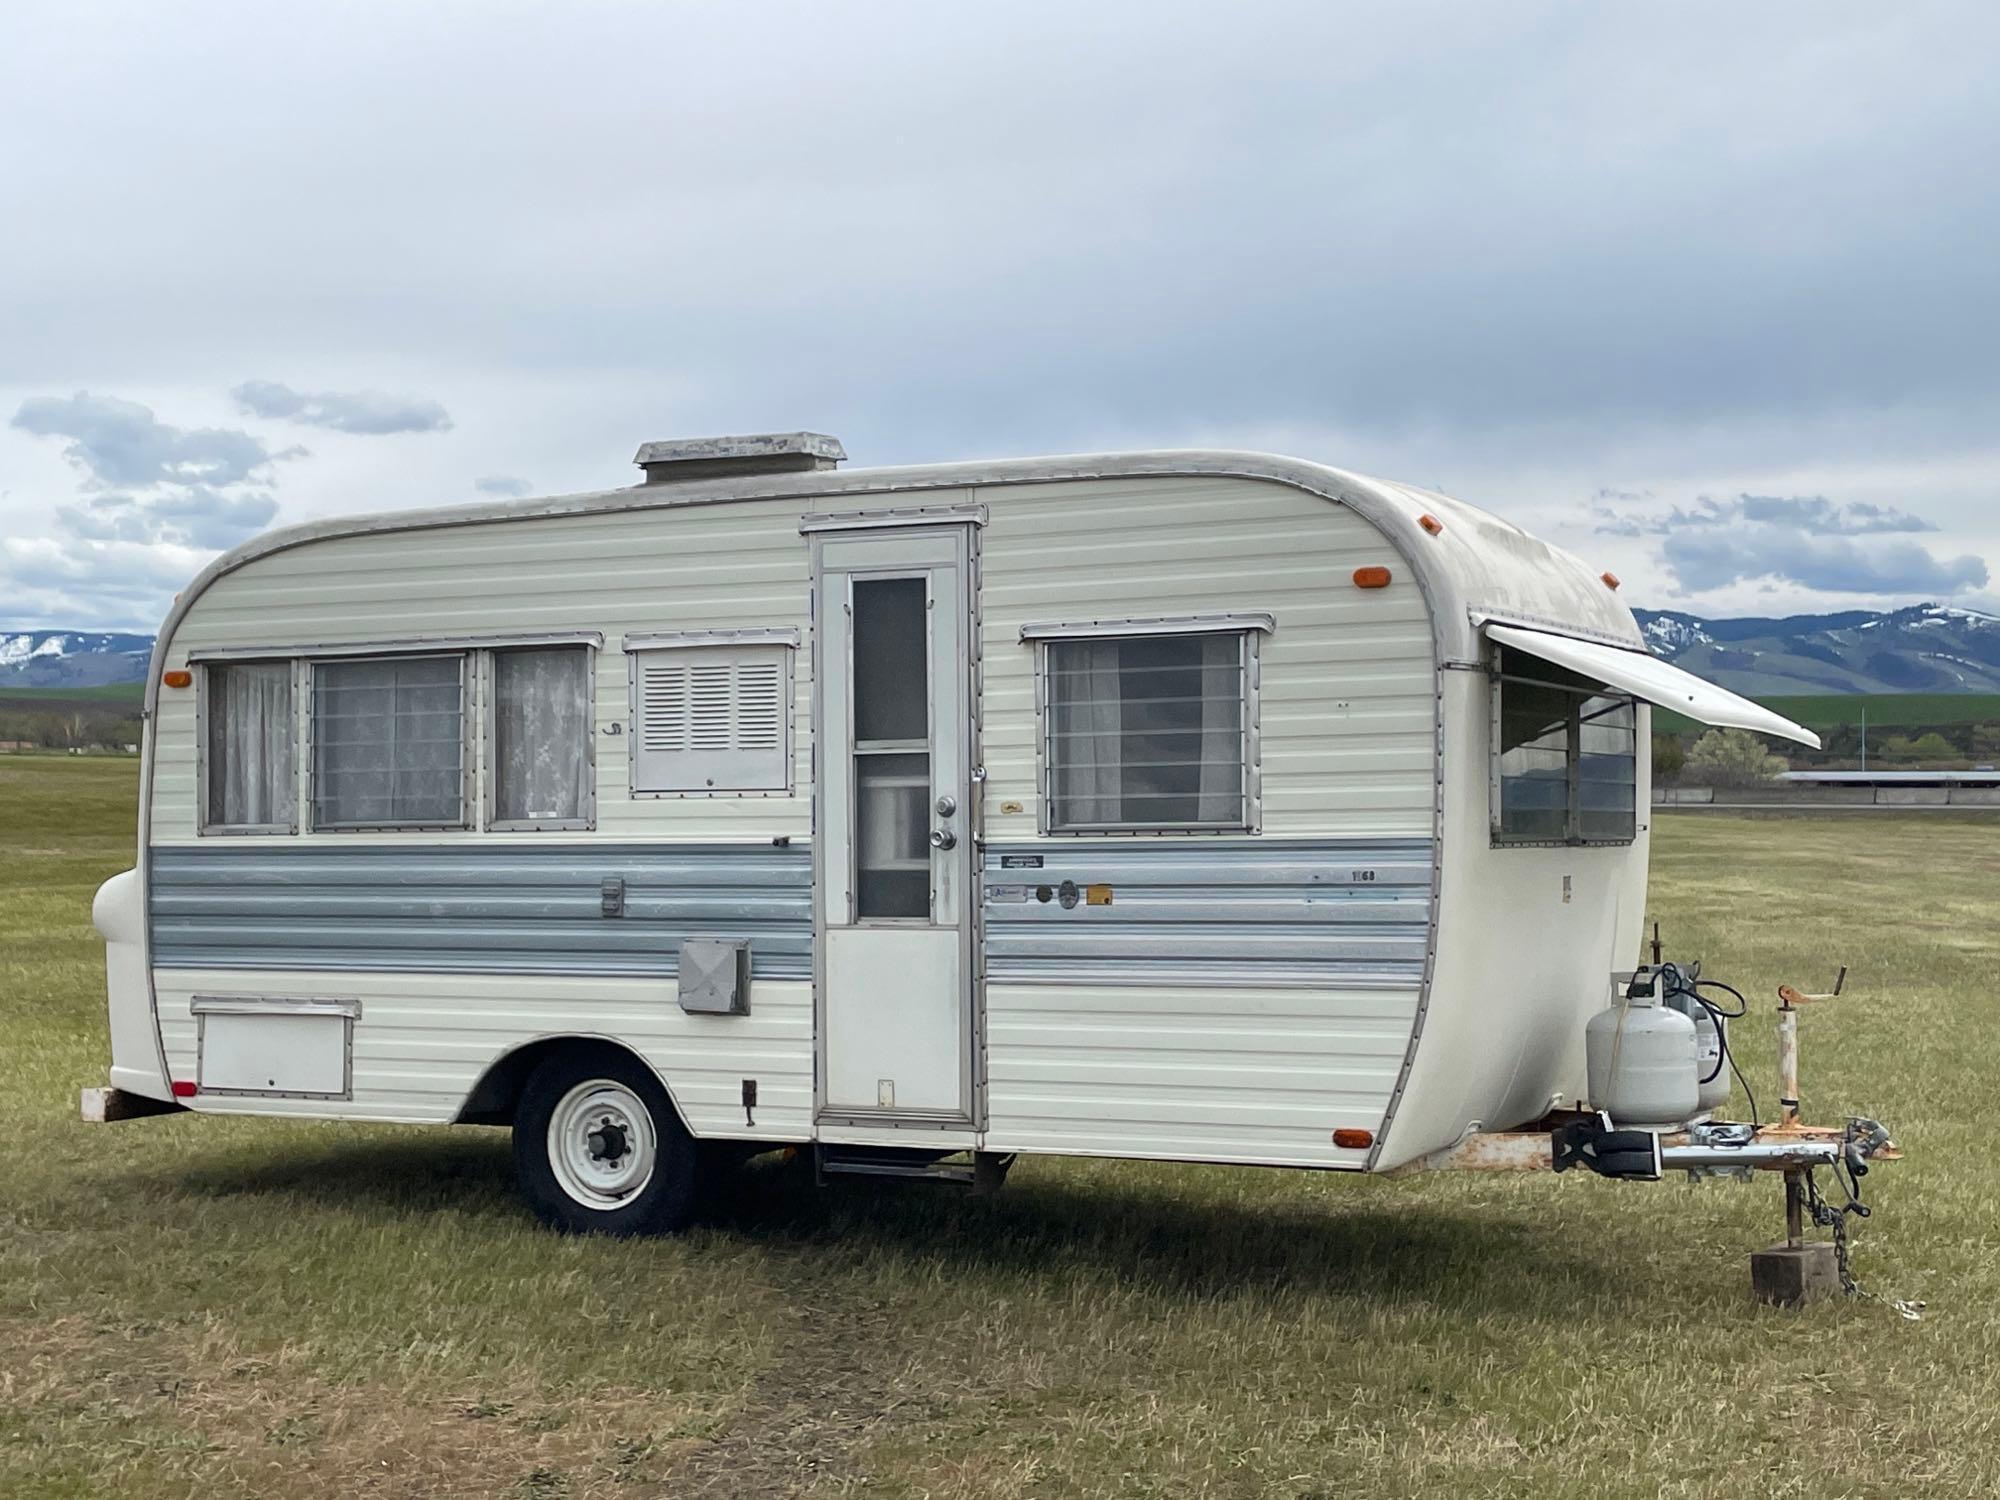 1968 Kencraft Single Axle Travel Trailer 18' (Perfect For Glamping)